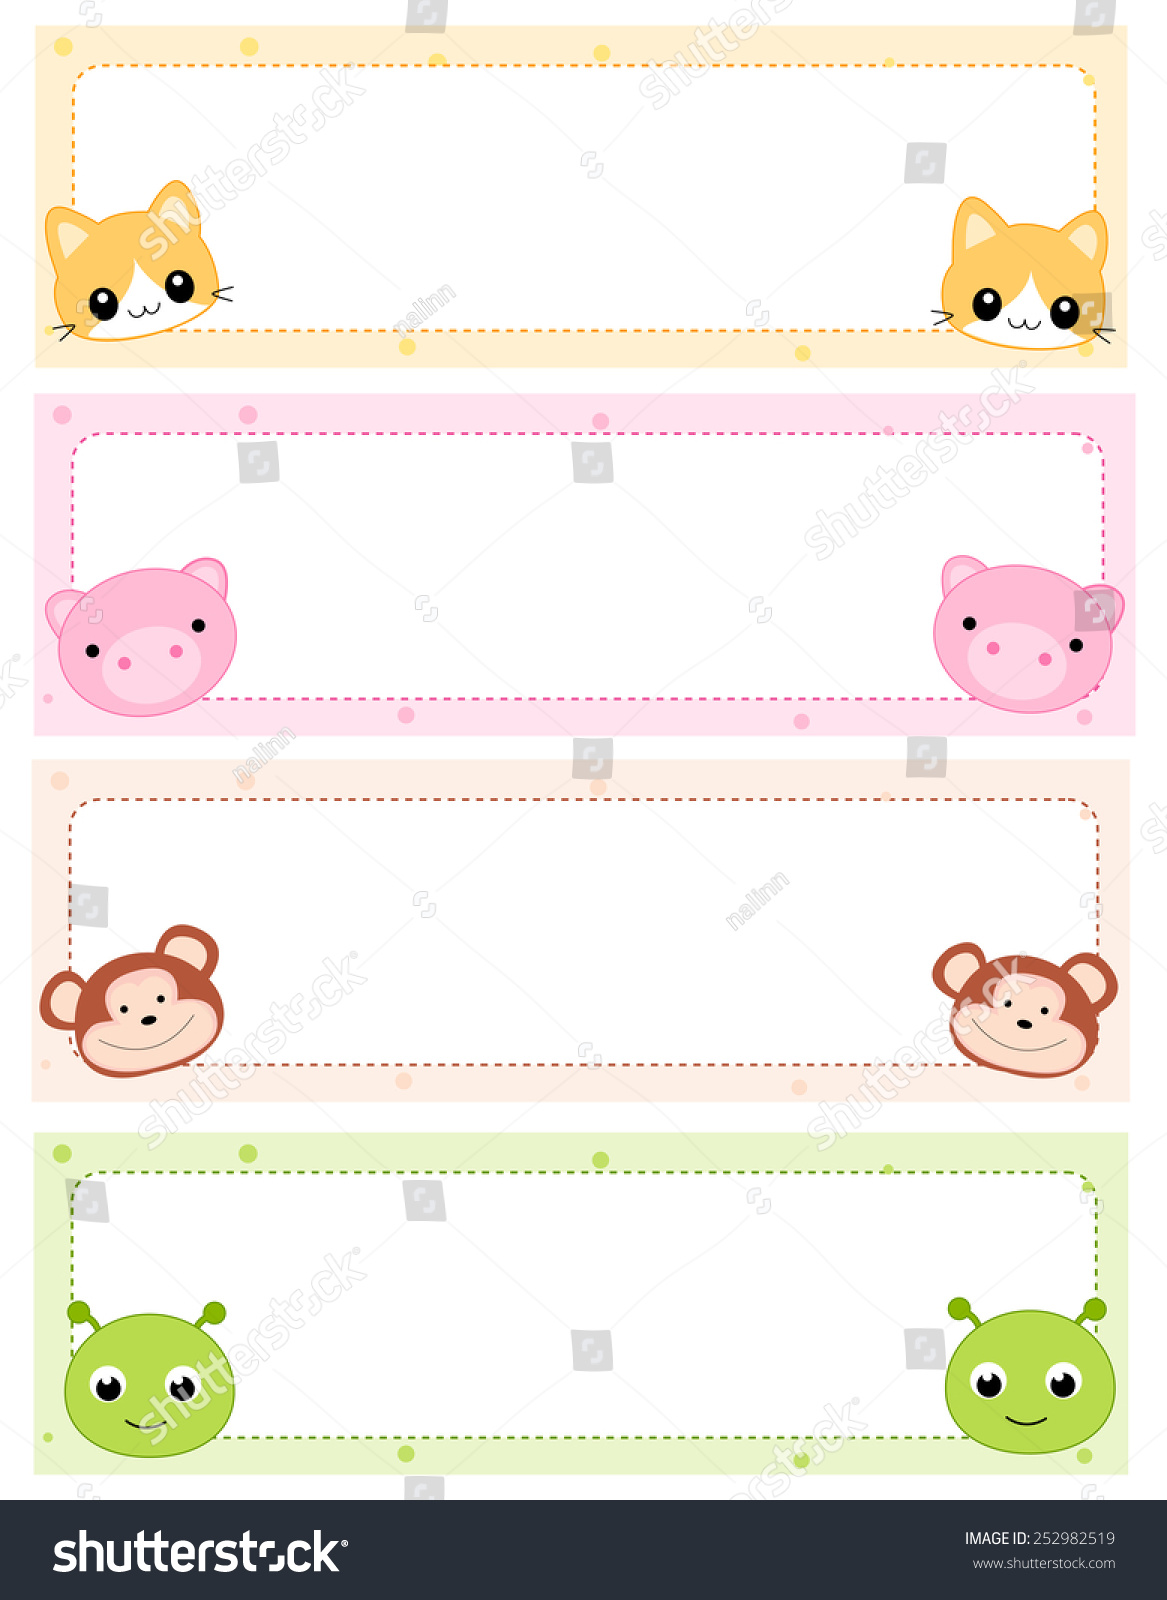 Colorful Kids Name s With Cute Animal Faces Royalty Free Stock Vector Avopix Com